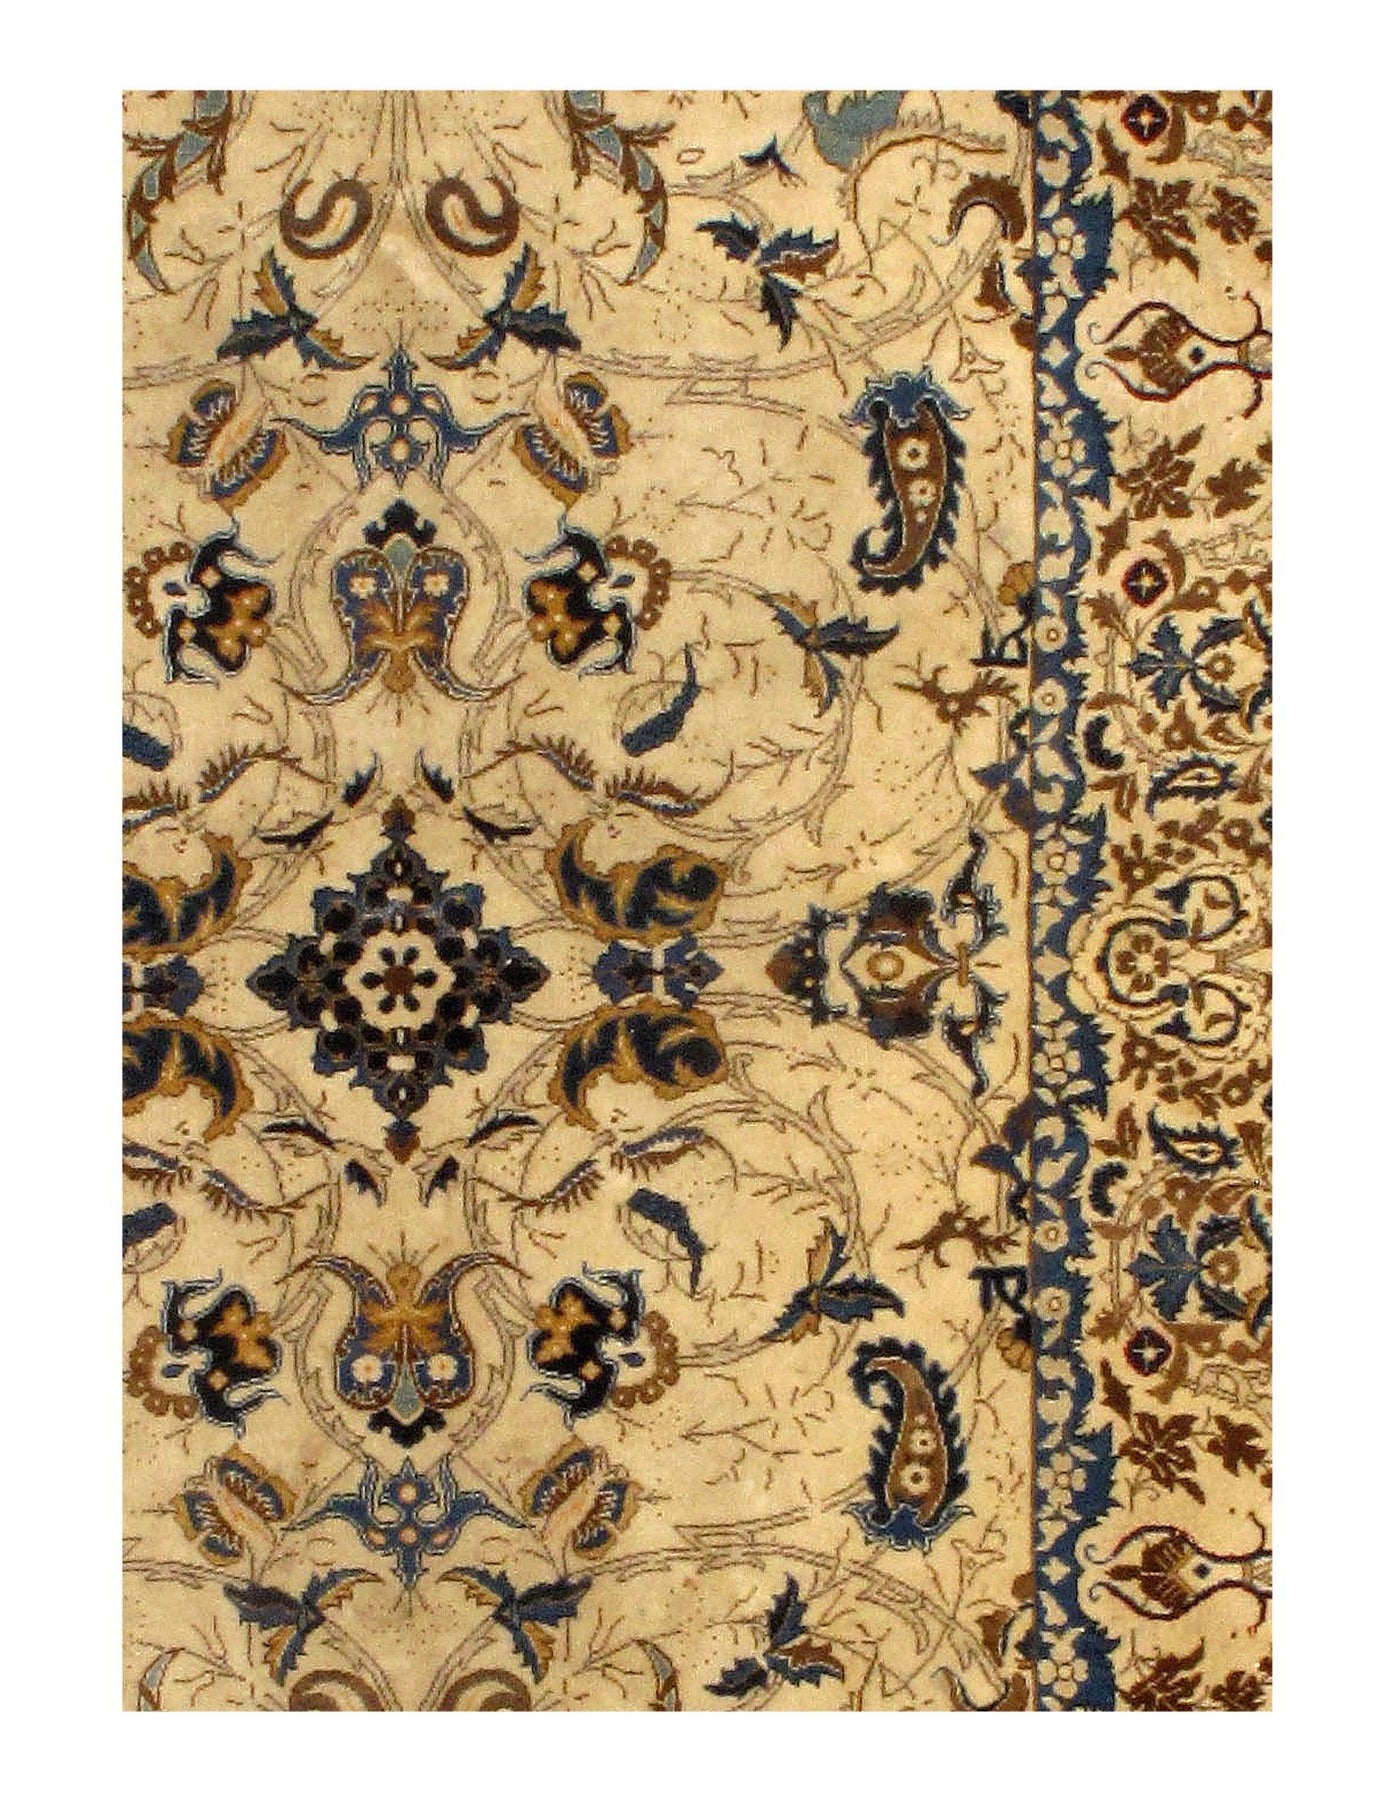 Canvello Ivory Antique Persian Kashan Rug - 4'1'' X 7'